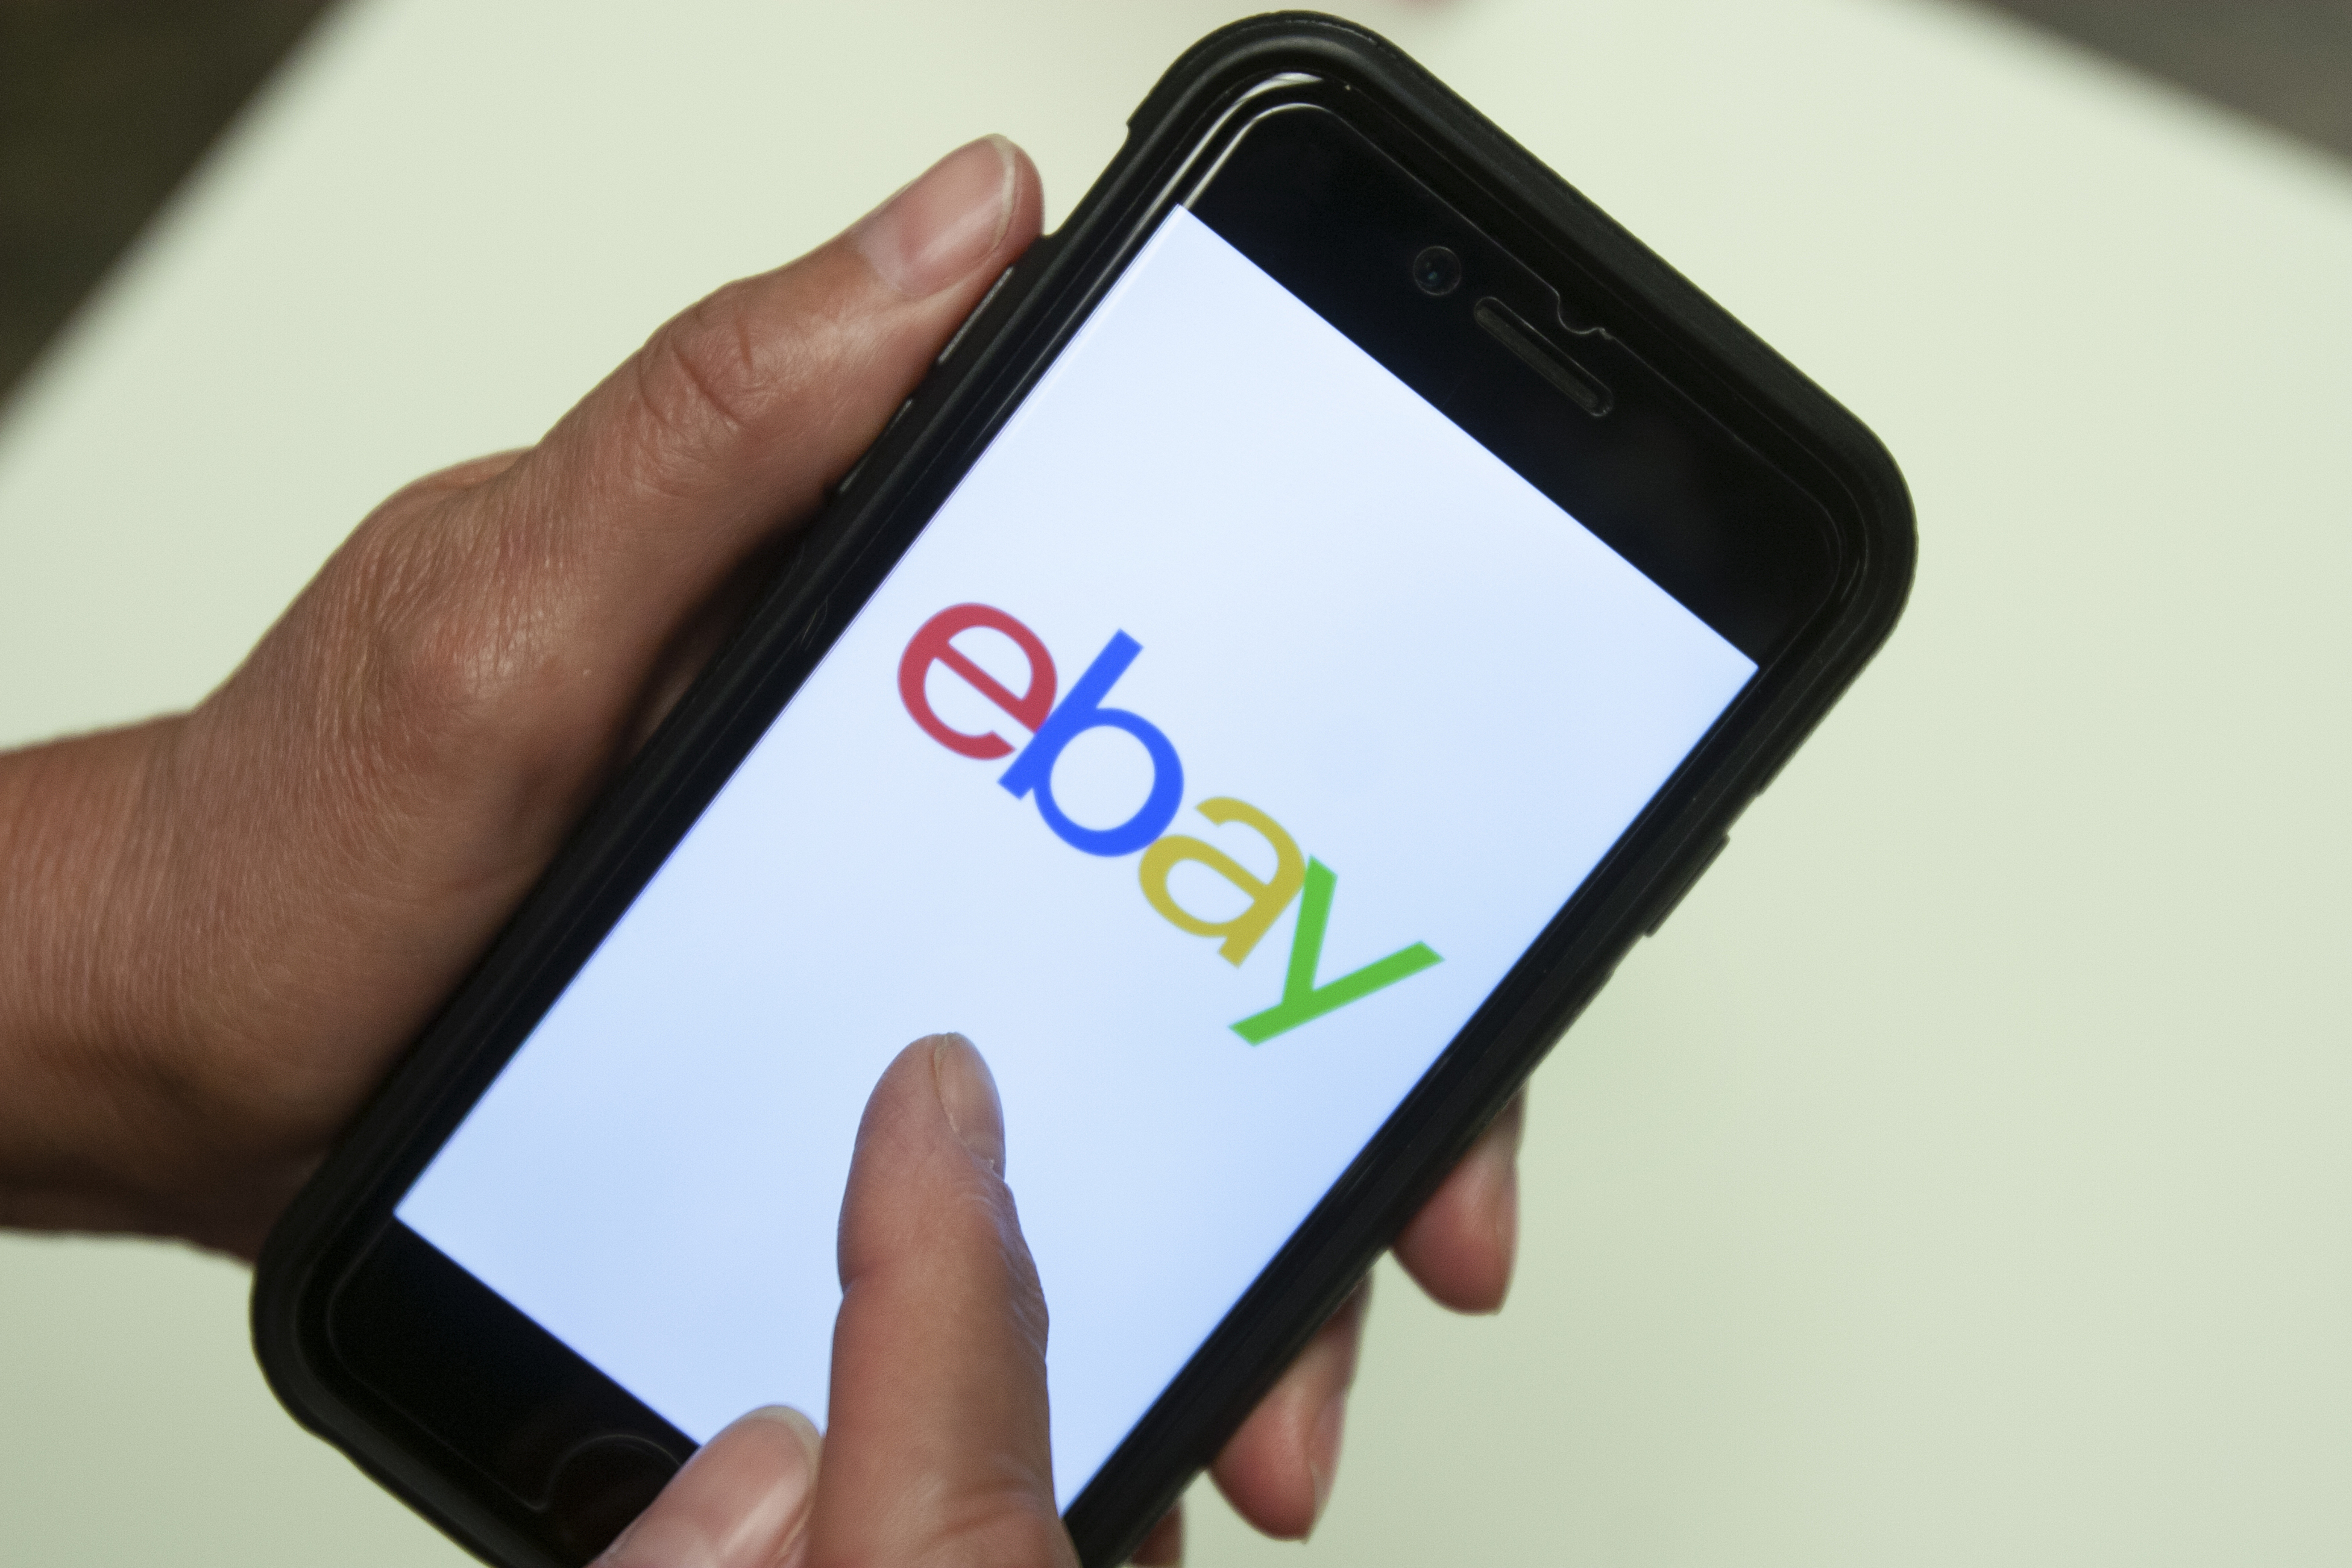 FILE - An eBay app is shown on a mobile phone, July 11, 2019, in Miami. (AP Photo/Wilfredo Lee, File)